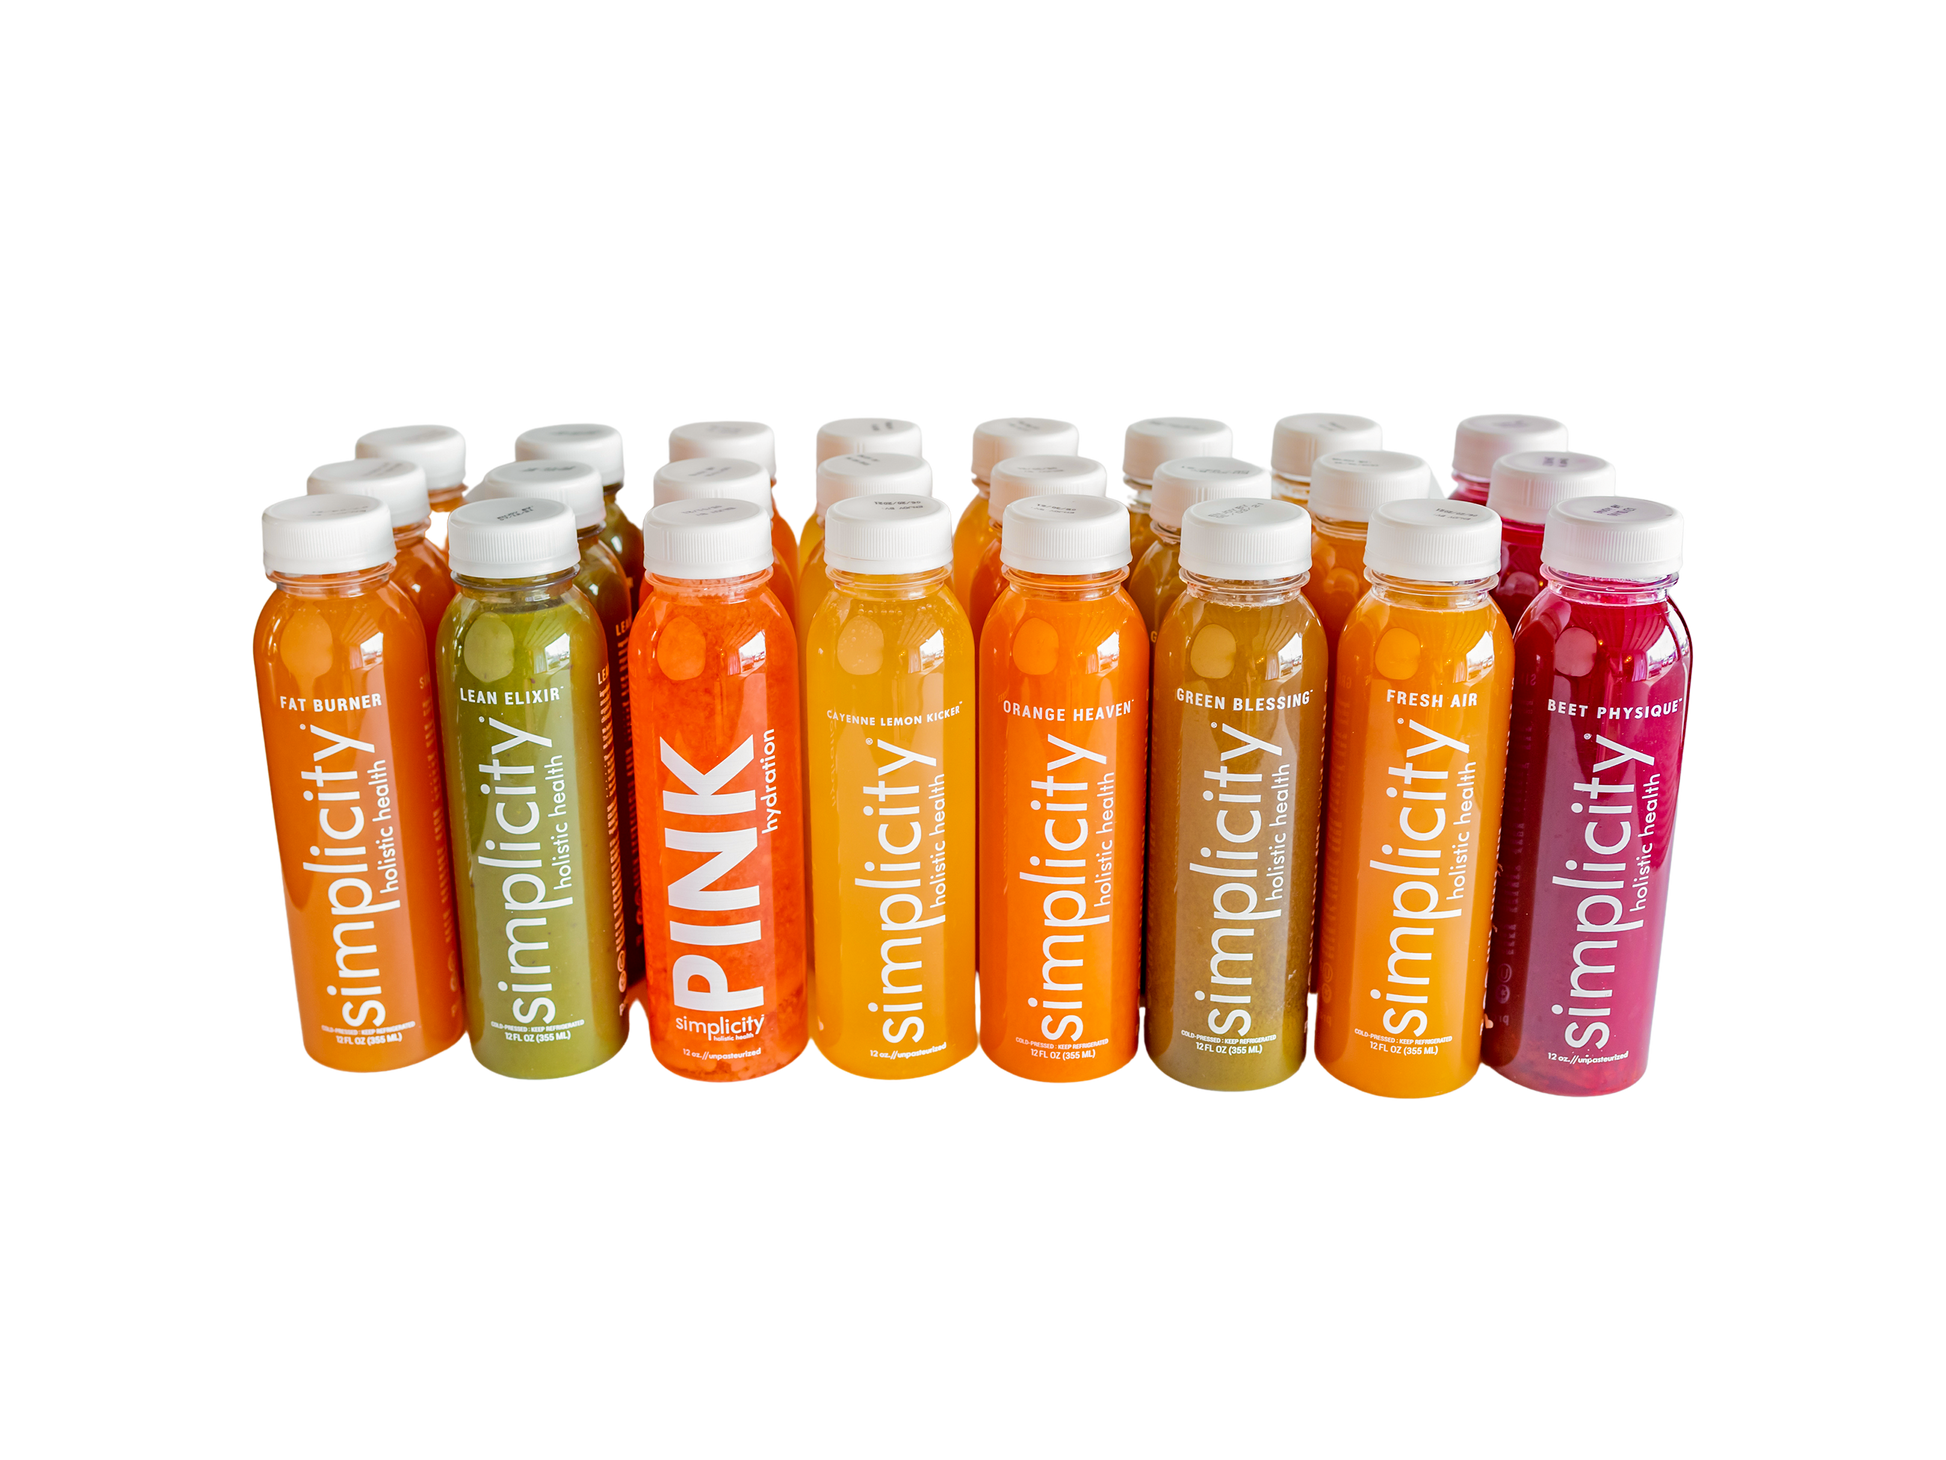 Nine Simplicity Cold-Pressed Juice flavors, 24 12-oz bottles (3 Lean Elixirs, 3 Fat Burners, 3 Fresh Airs, 3 Green Blessings, 2 Orange Heavens, 3 Pink Hydrations, 3 Cayenne Lemon Kickers, 2 Beet Physiques, and 2 Collagen Coladas).